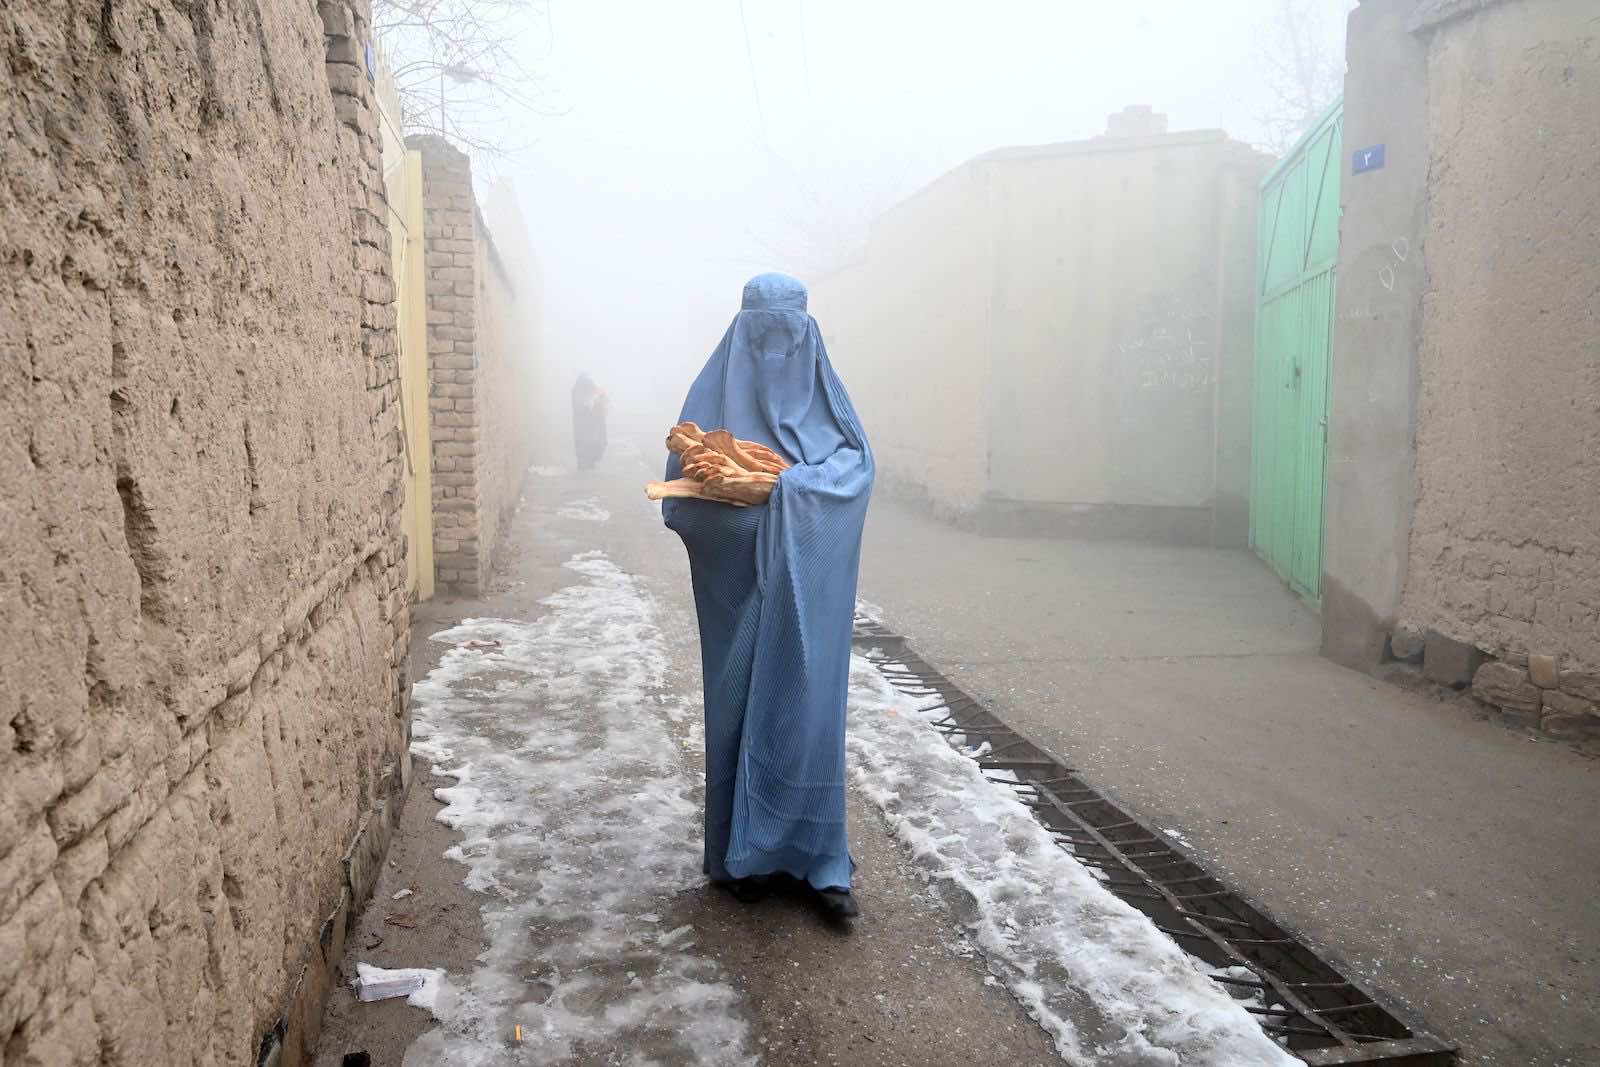 A burqa-clad woman after receiving handouts of bread in Kabul on 18 January (Wakil Kohsar/AFP via Getty Images)